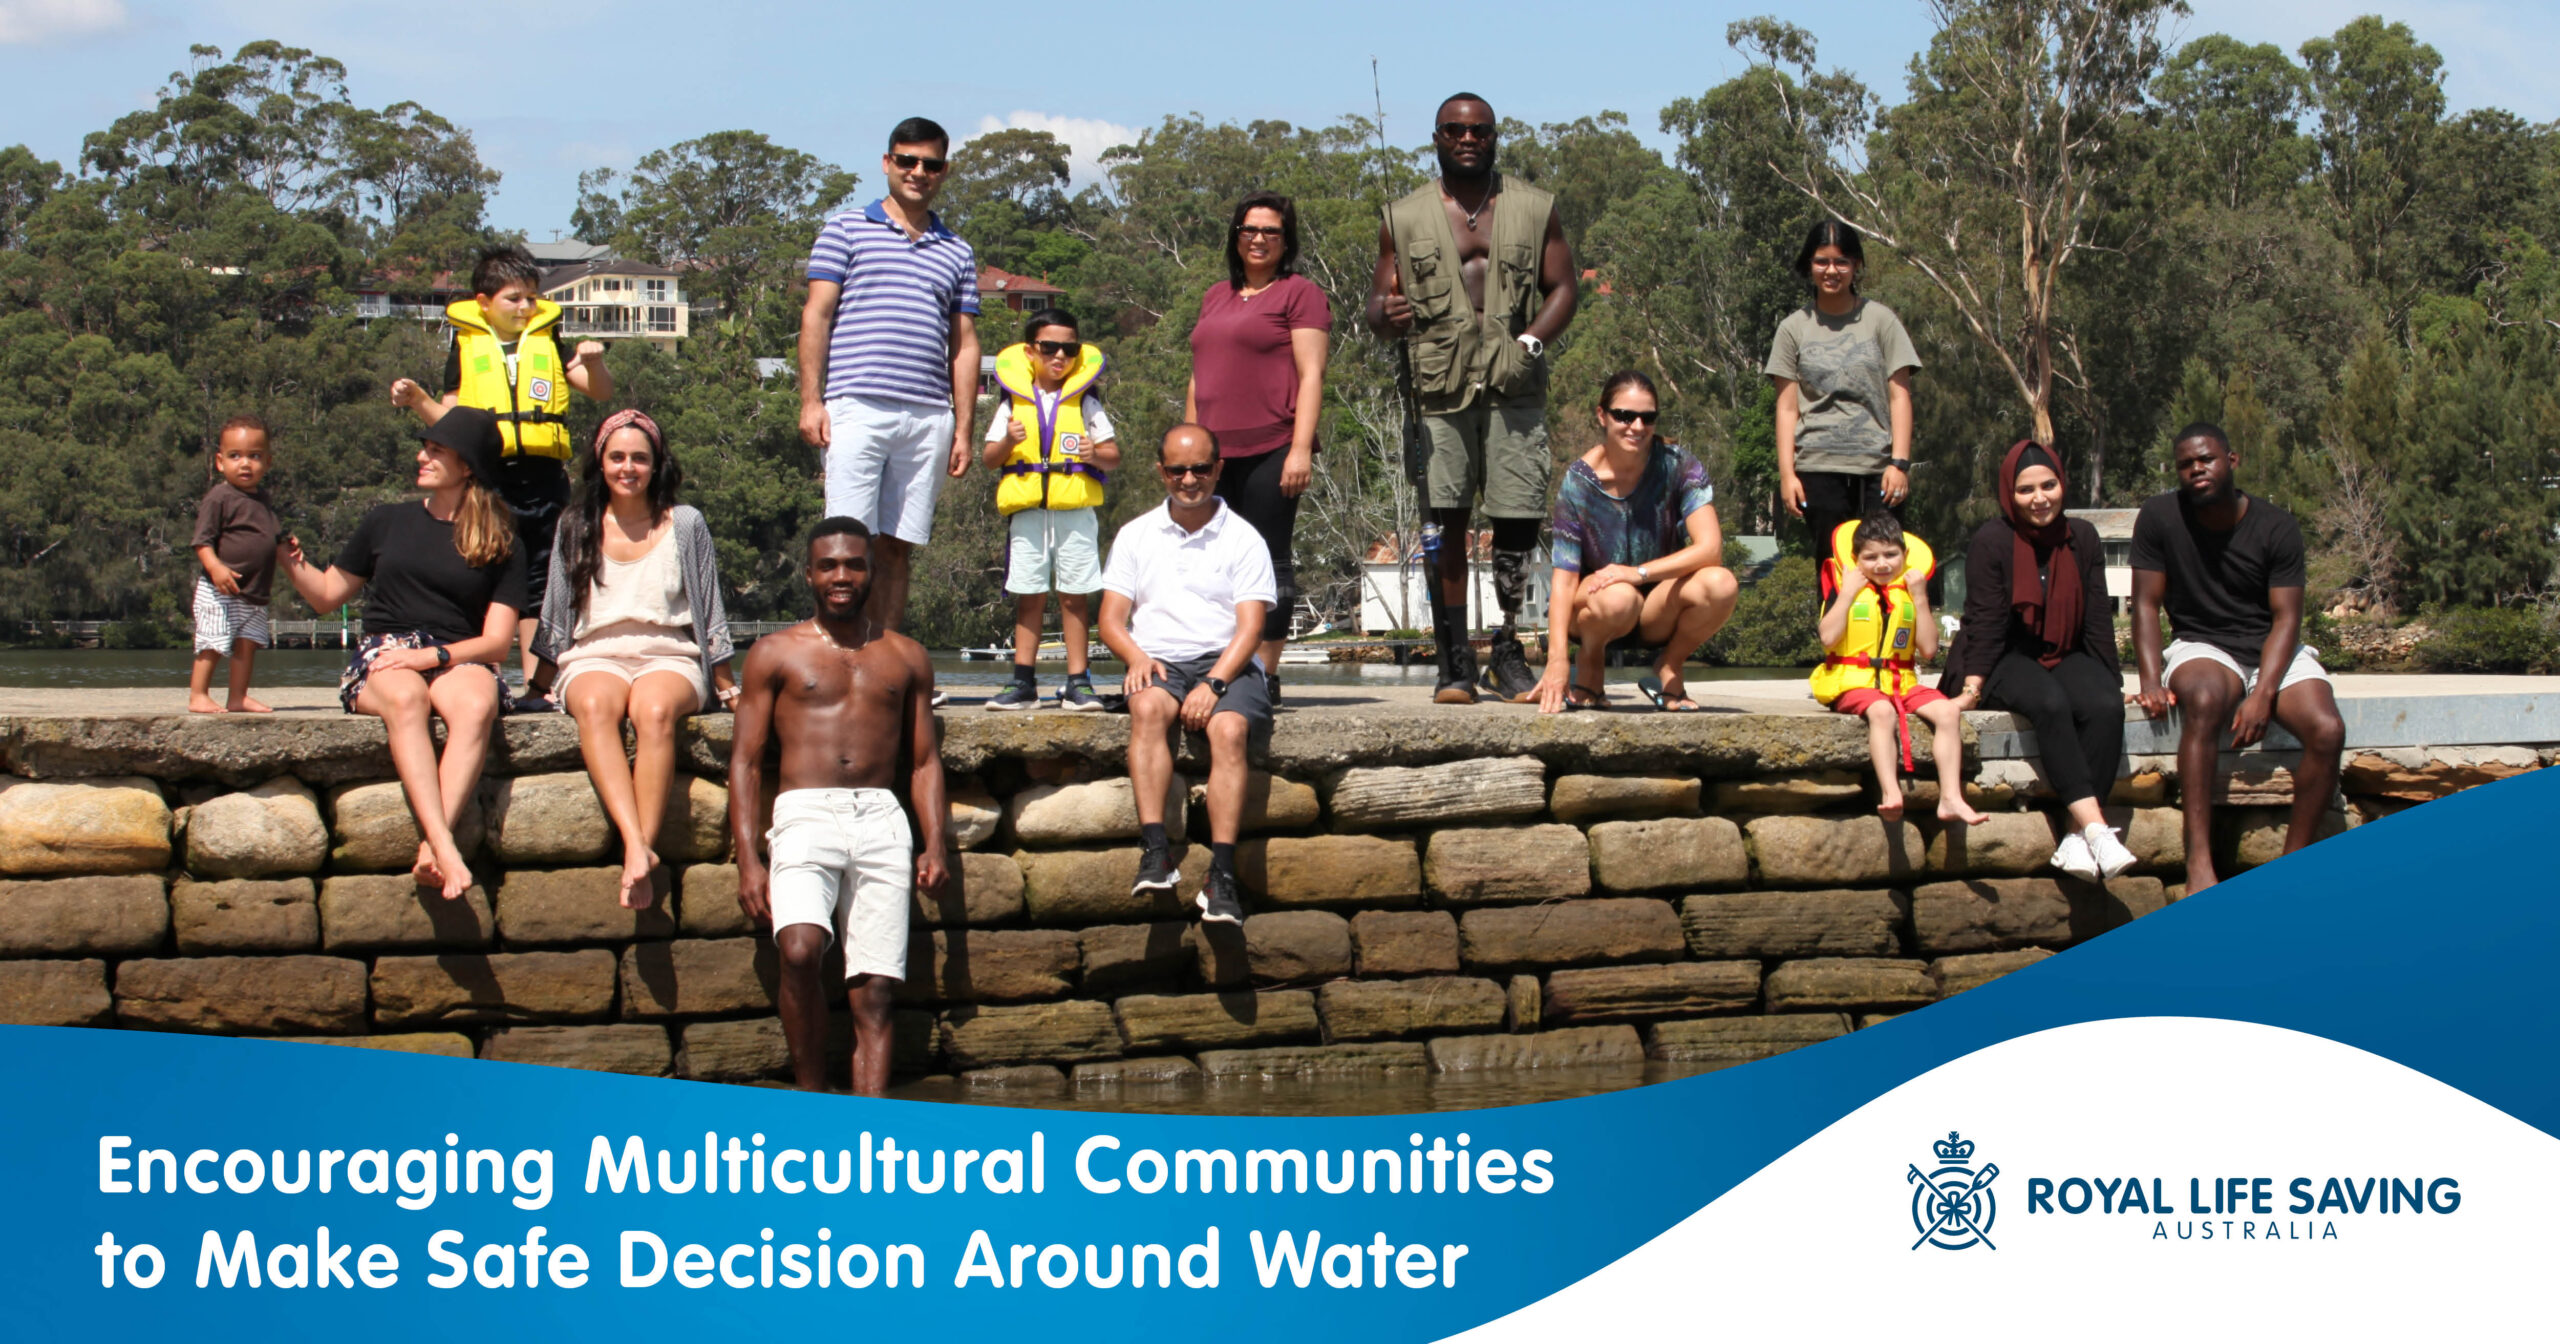 Royal Life Saving Encouraging Multicultural Communities to Make Safe Decisions Around Water